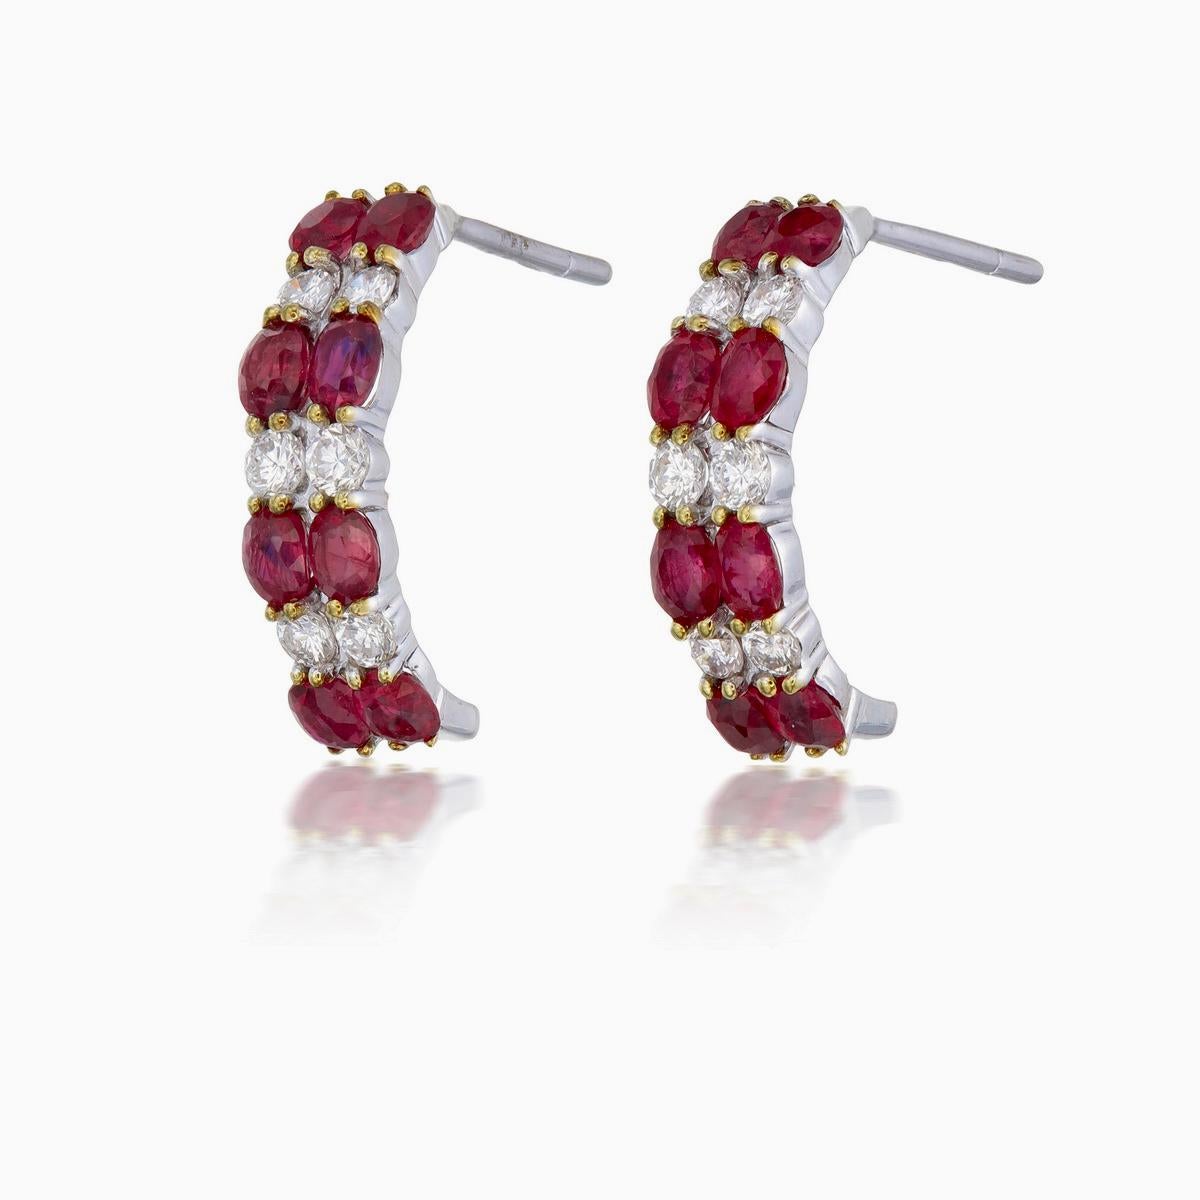 Oval Cut AGL Thai Certified 2.65 Carat Pigeon Blood Ruby and Diamond Earrings in 18K Gold For Sale